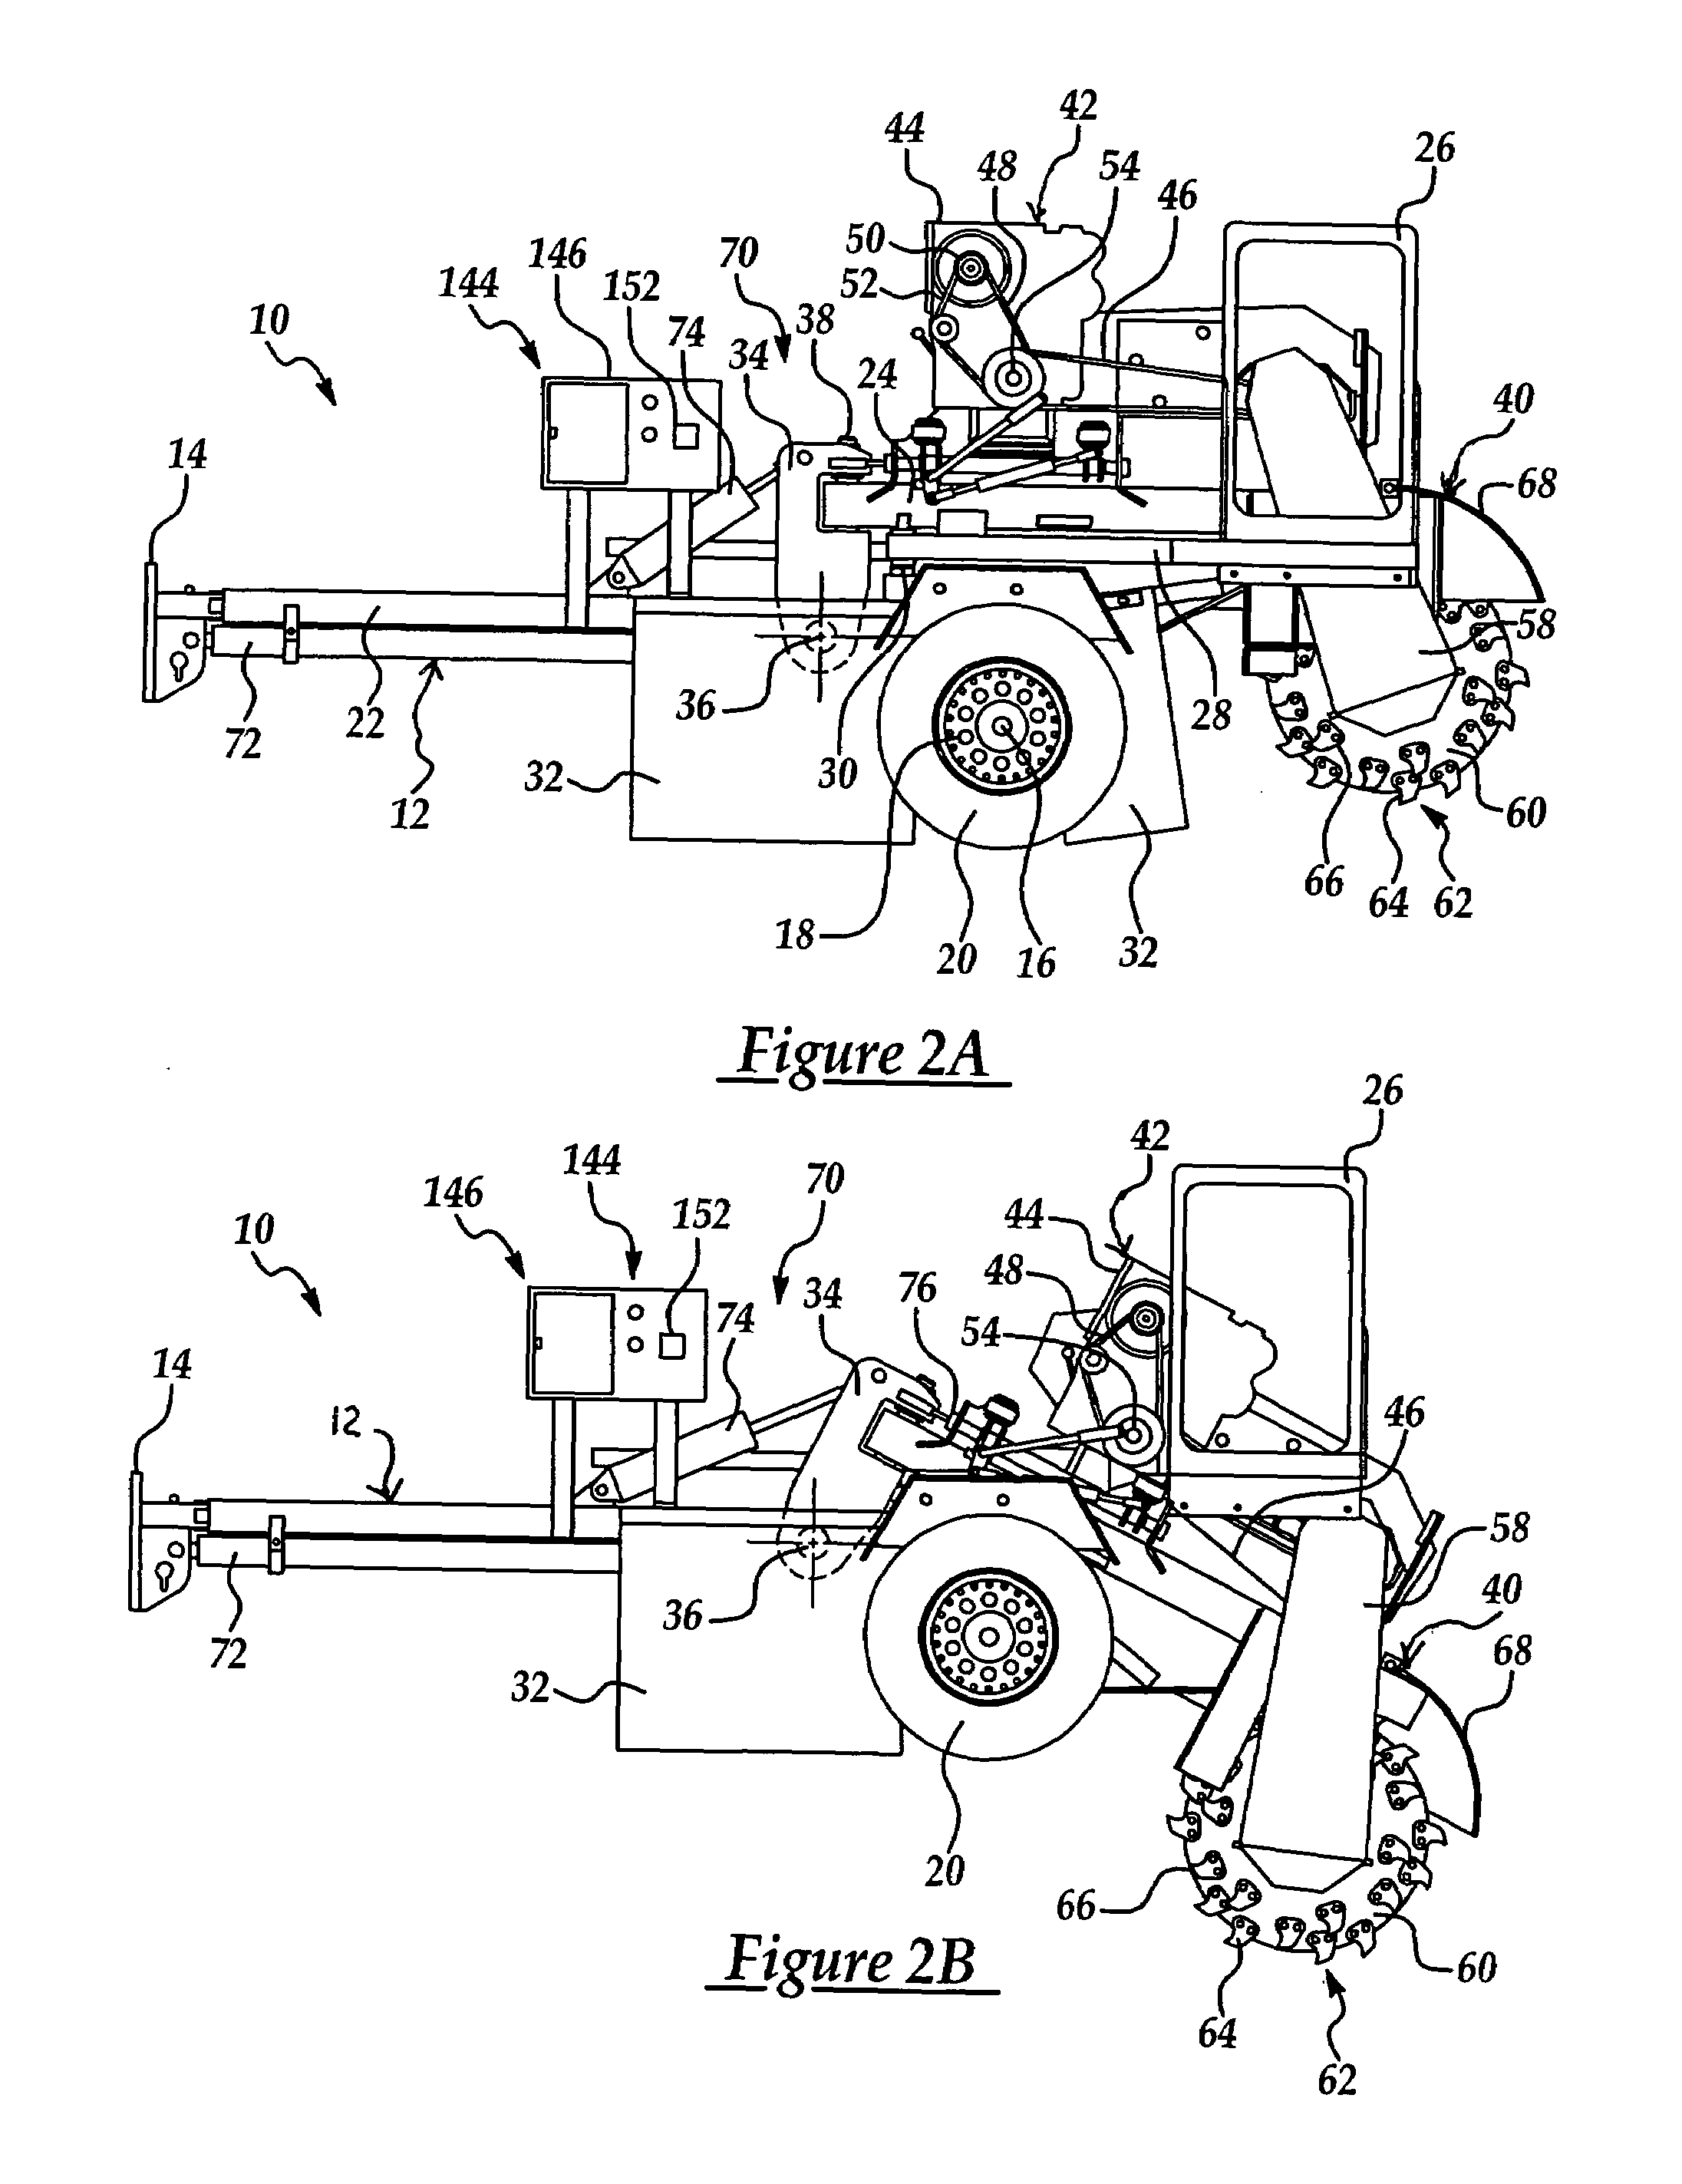 Stump grinder having automatic reversing feed assembly